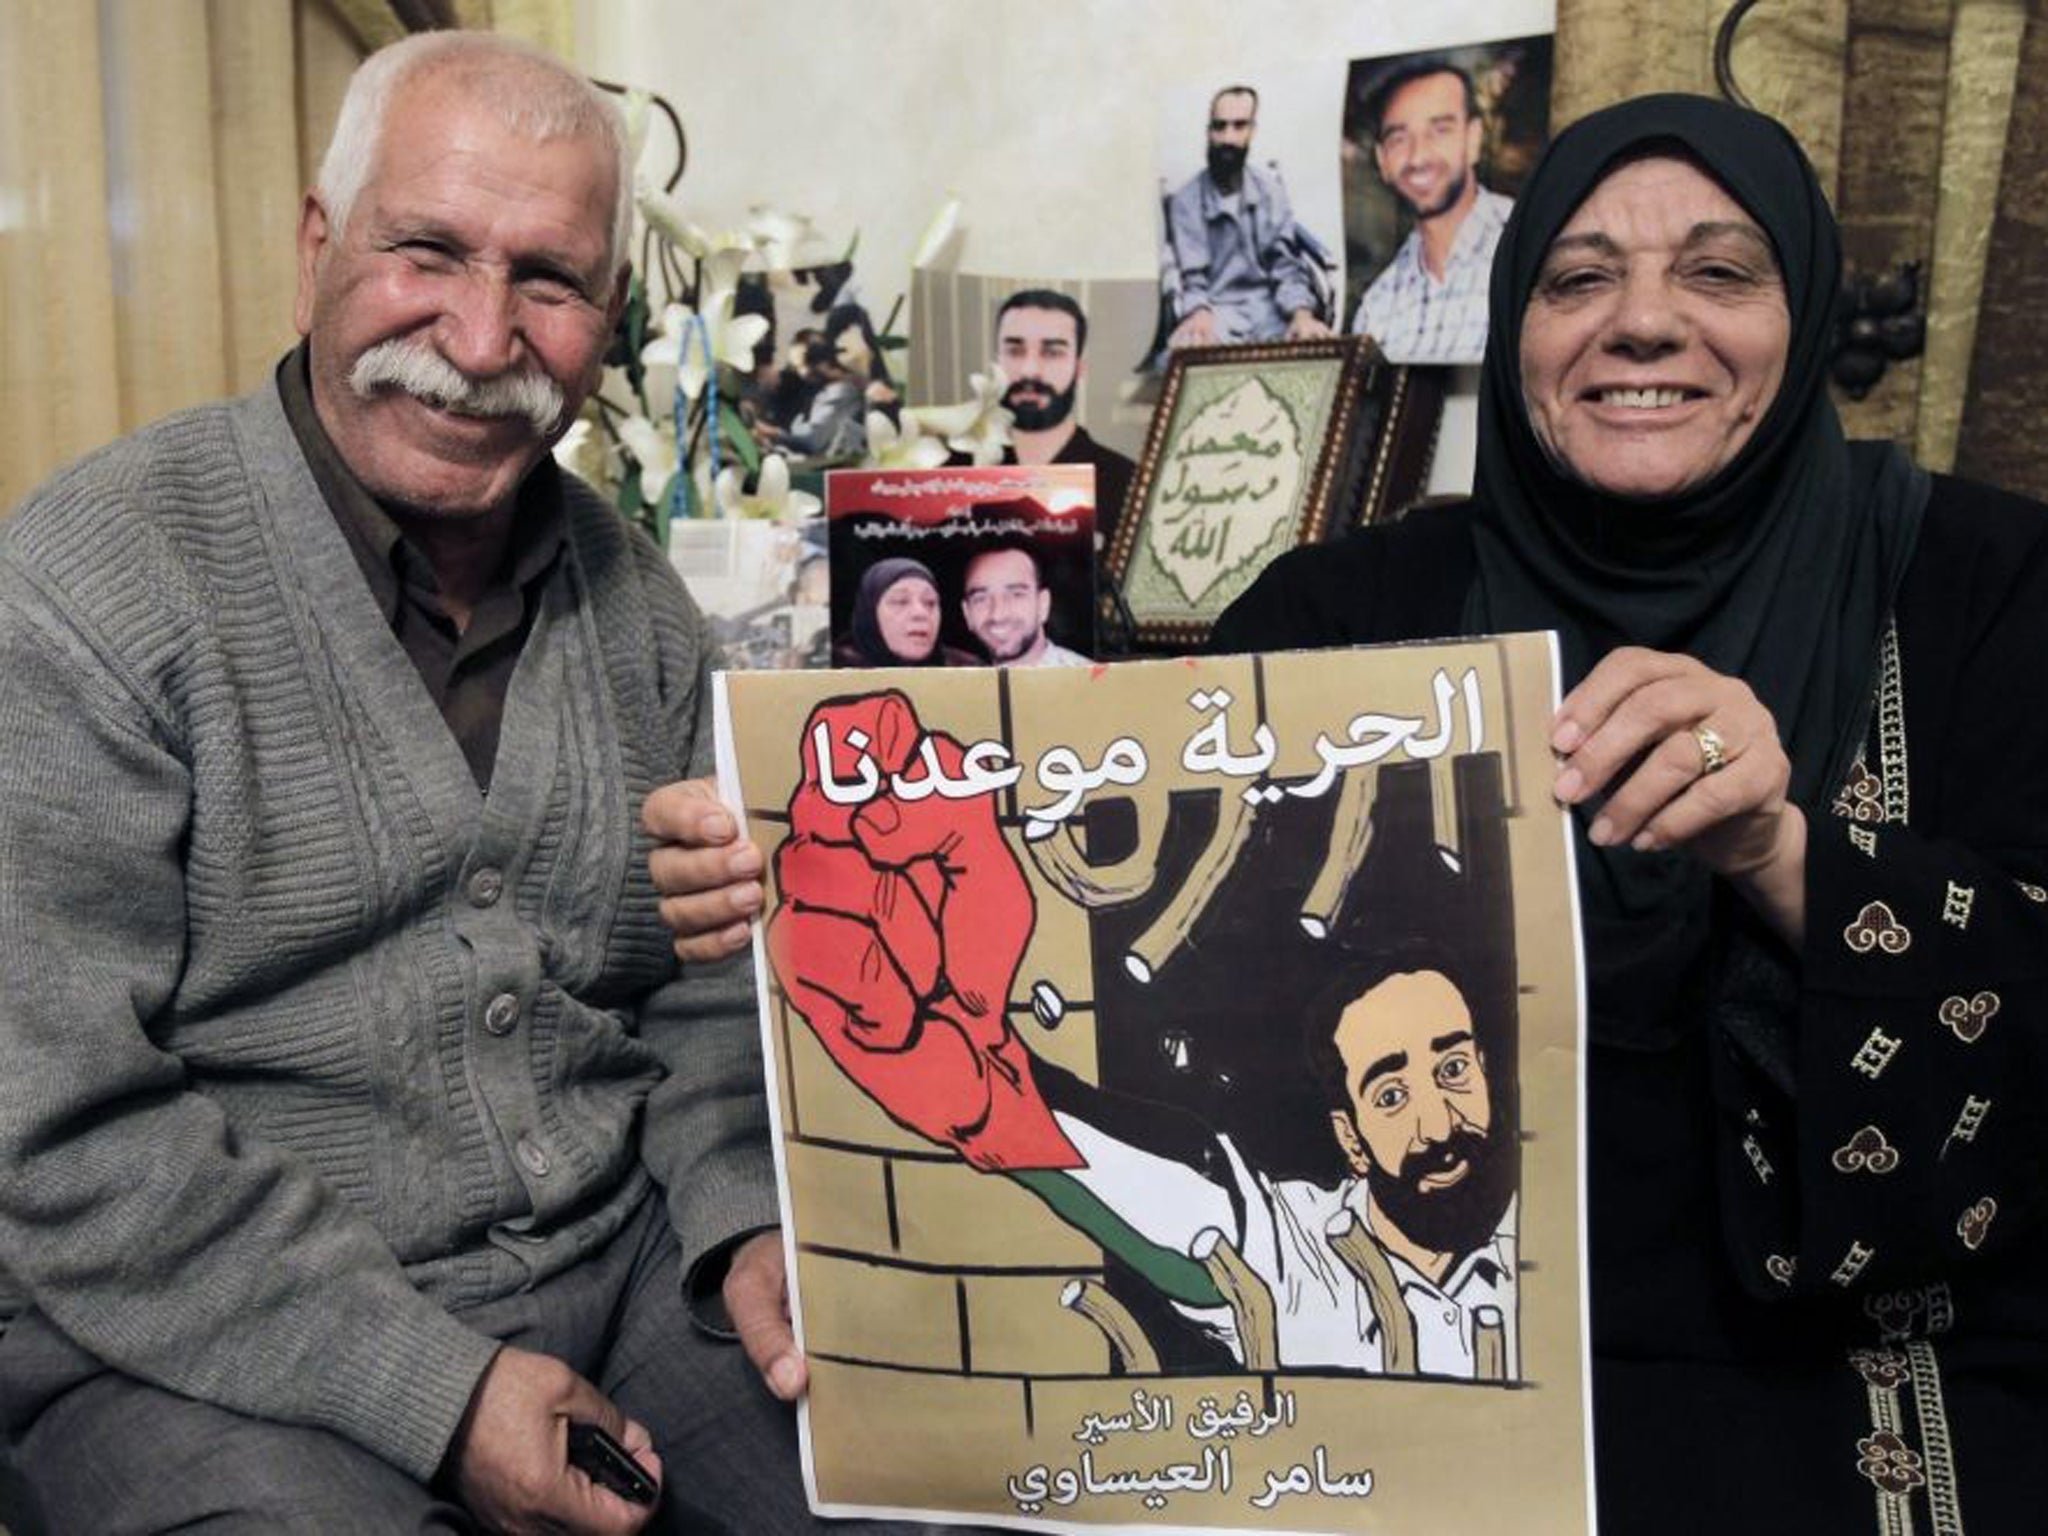 The parents of Palestinian hunger-striking prisoner Samer Issawi at their home in the Issawiya neighborhood in Arab East Jerusalem as they rejoice that their son has decided to end his hunger strike